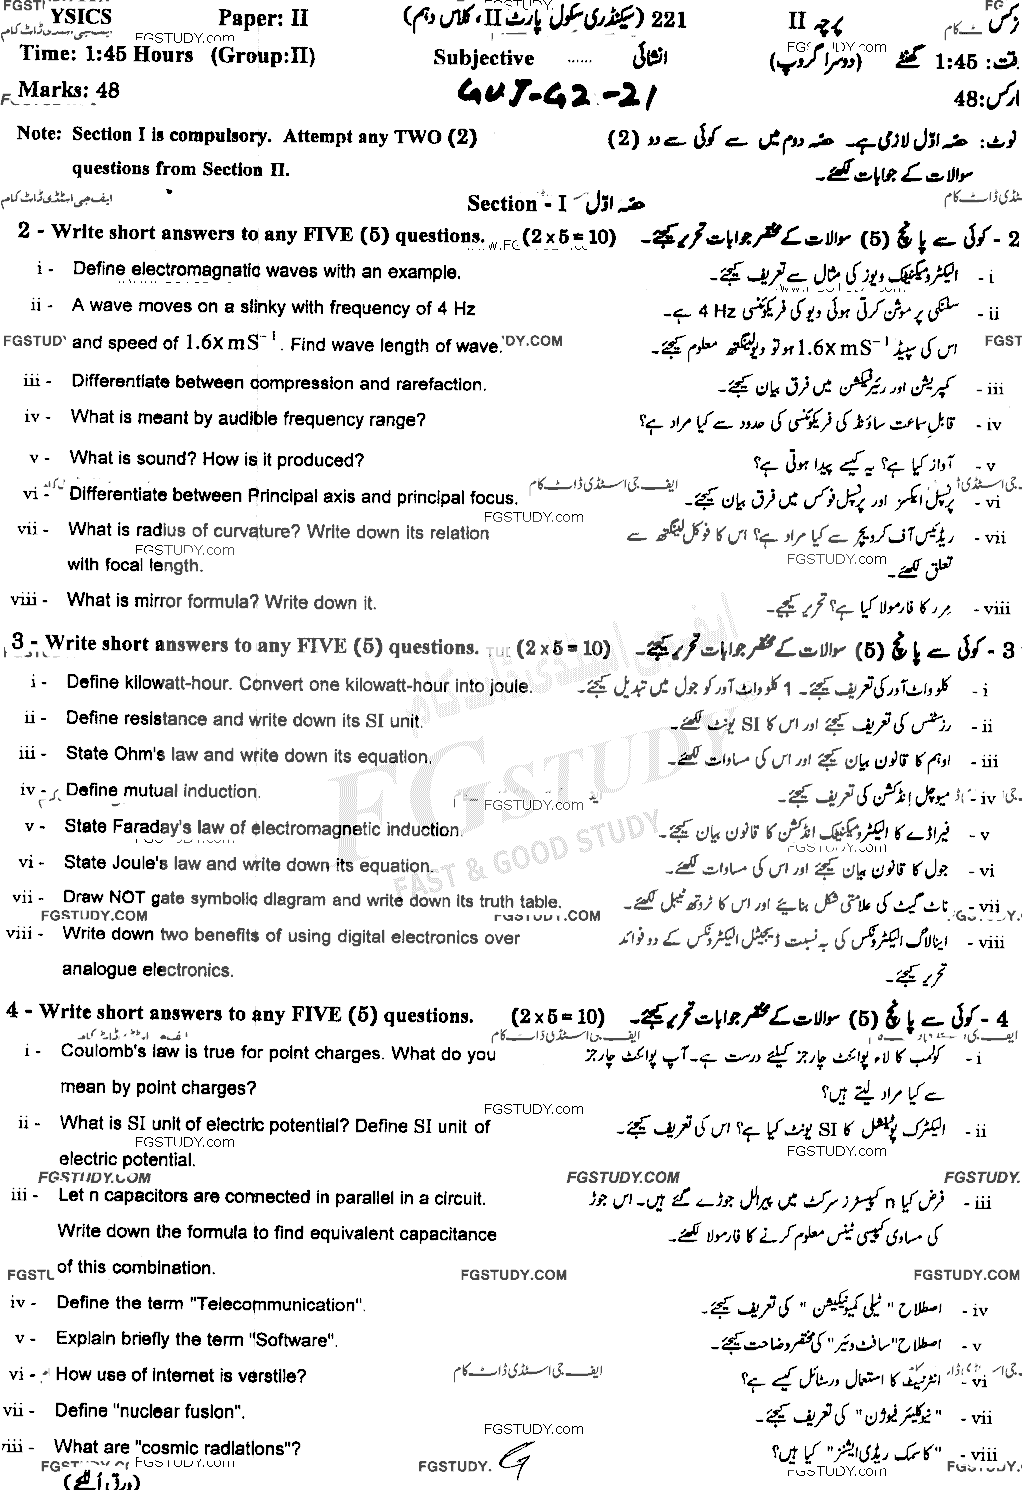 10th Class Physics Past Paper 2021 Gujranwala Board Group 2 Subjective